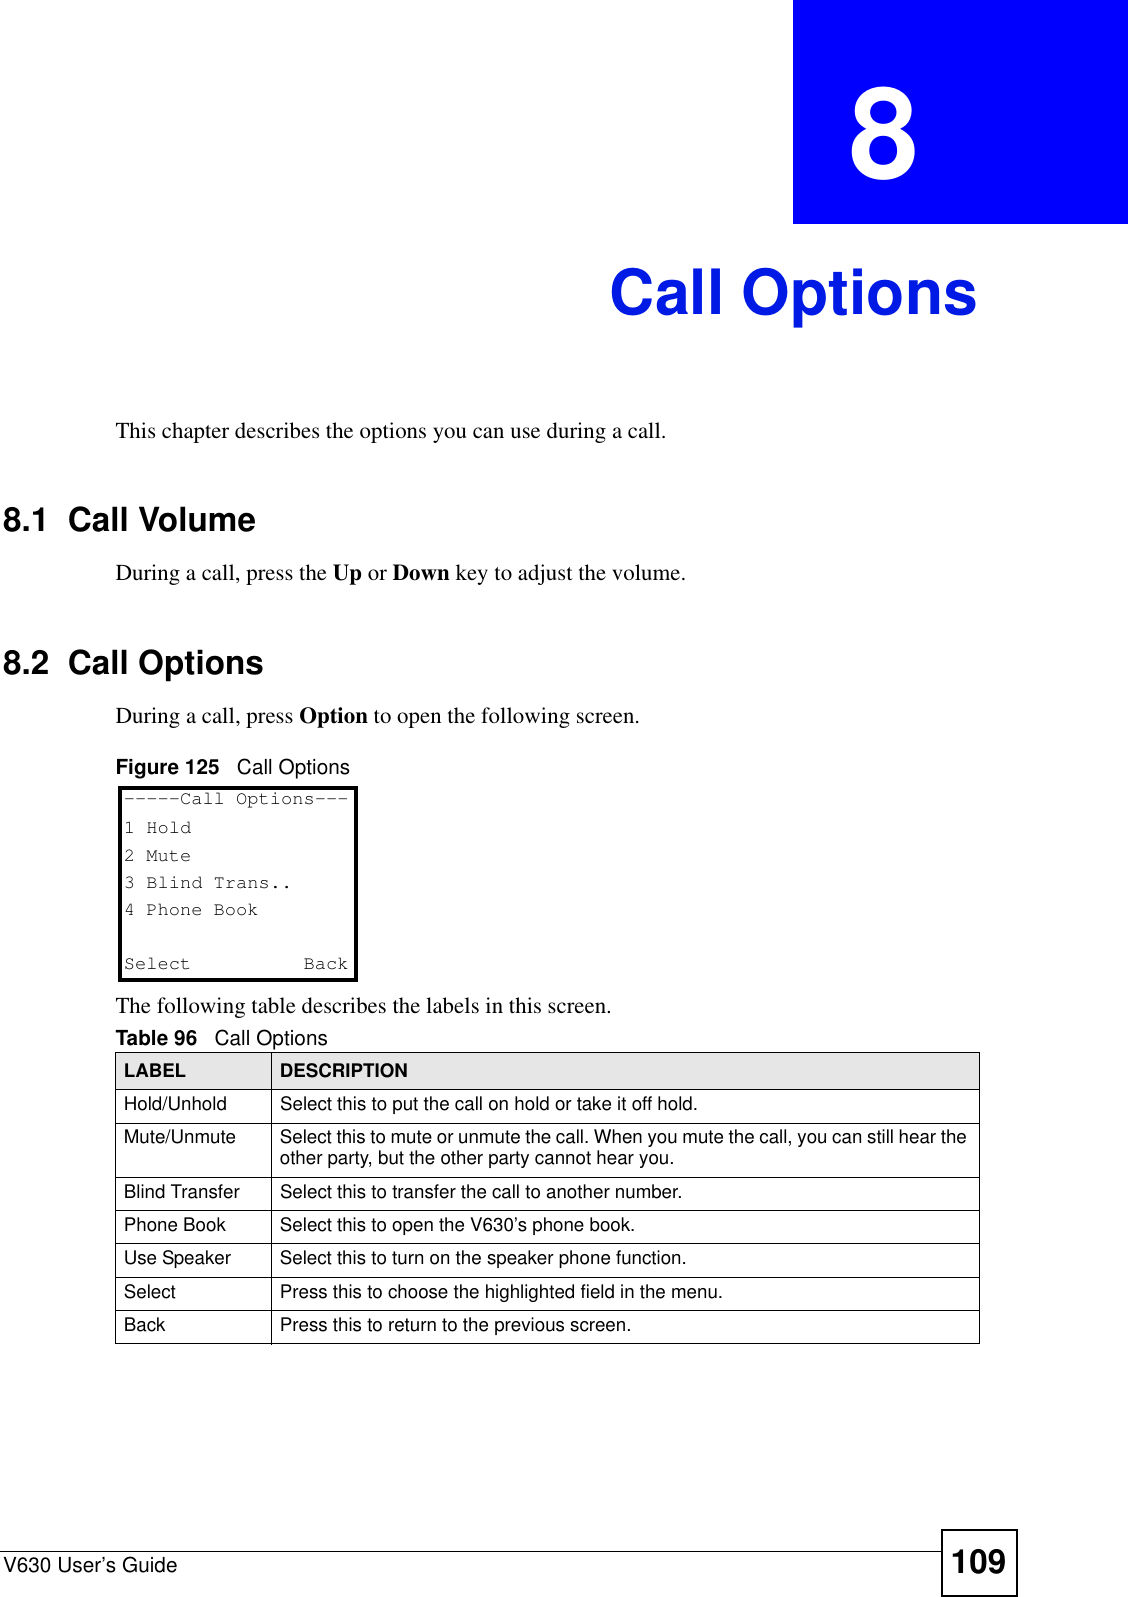 V630 User’s Guide 109CHAPTER  8 Call OptionsThis chapter describes the options you can use during a call. 8.1  Call VolumeDuring a call, press the Up or Down key to adjust the volume. 8.2  Call OptionsDuring a call, press Option to open the following screen. Figure 125   Call OptionsThe following table describes the labels in this screen.Table 96   Call OptionsLABEL DESCRIPTIONHold/Unhold Select this to put the call on hold or take it off hold.Mute/Unmute Select this to mute or unmute the call. When you mute the call, you can still hear the other party, but the other party cannot hear you.Blind Transfer Select this to transfer the call to another number.Phone Book Select this to open the V630’s phone book.Use Speaker Select this to turn on the speaker phone function.Select Press this to choose the highlighted field in the menu.Back Press this to return to the previous screen. -----Call Options---1 Hold2 Mute3 Blind Trans..4 Phone BookSelect   Back